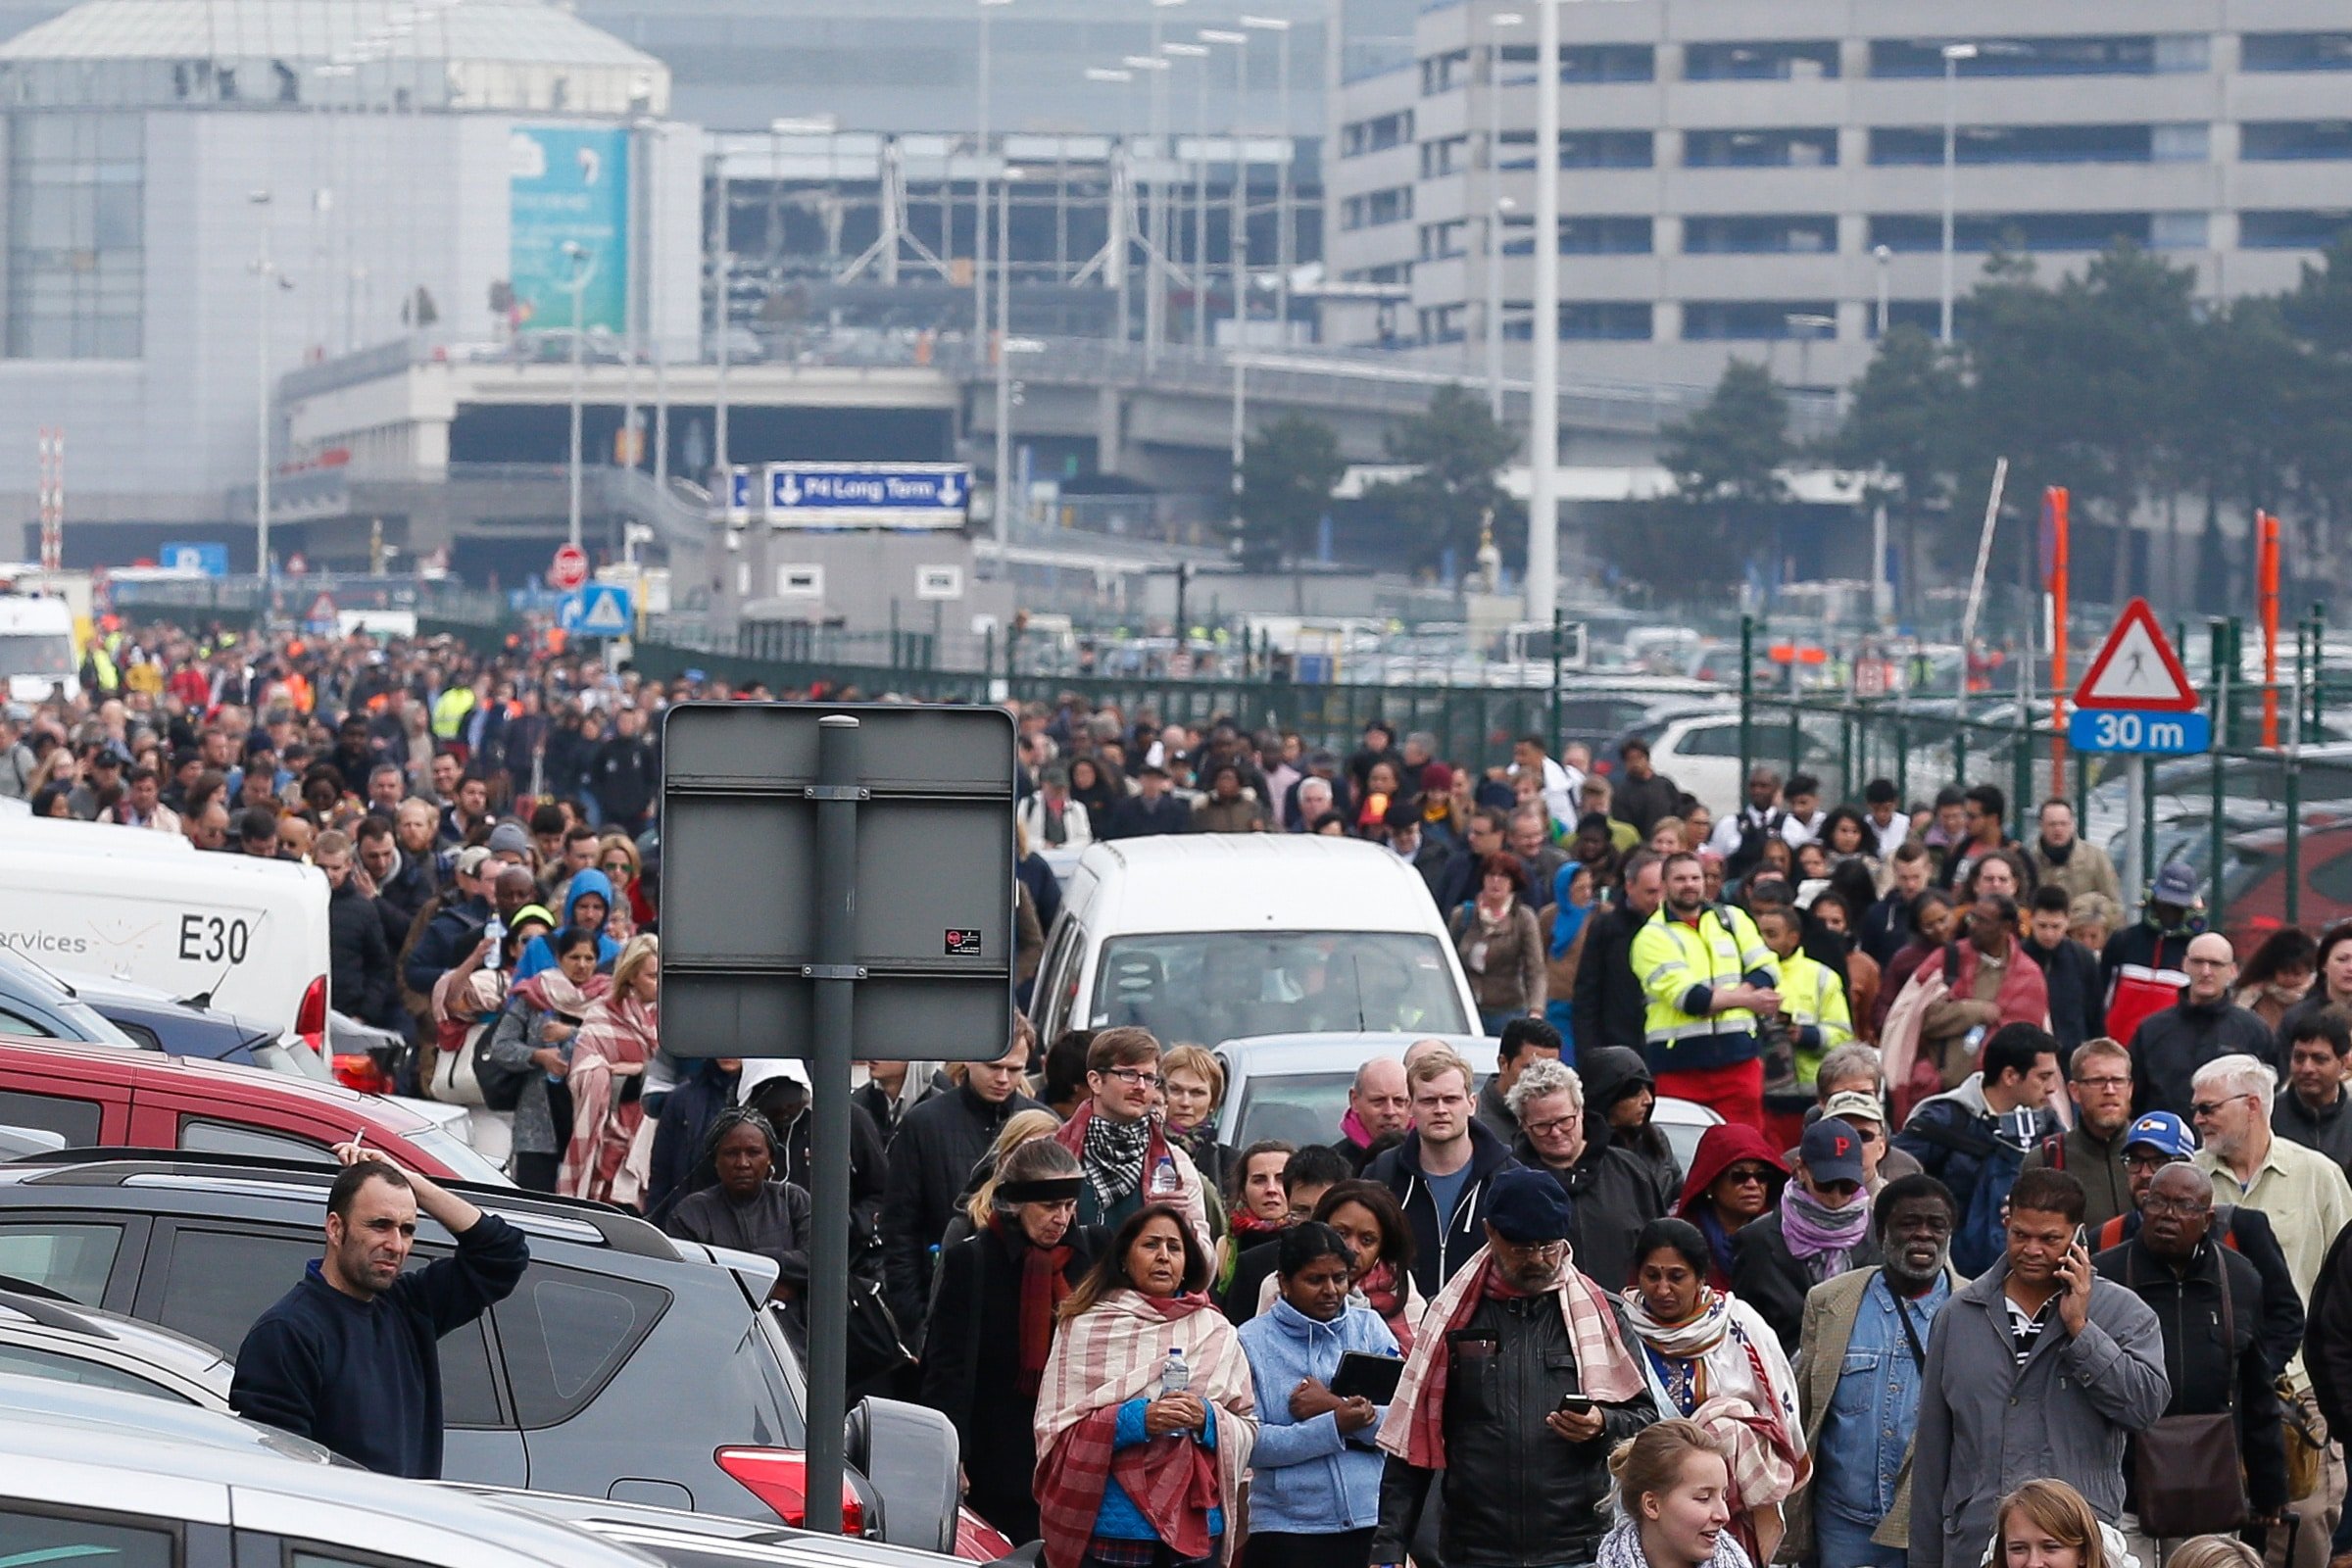 People evacuate Zaventem airport after explosions near Brussels on 22 March. Photo: CNS/Laurent Dubrule, EPA